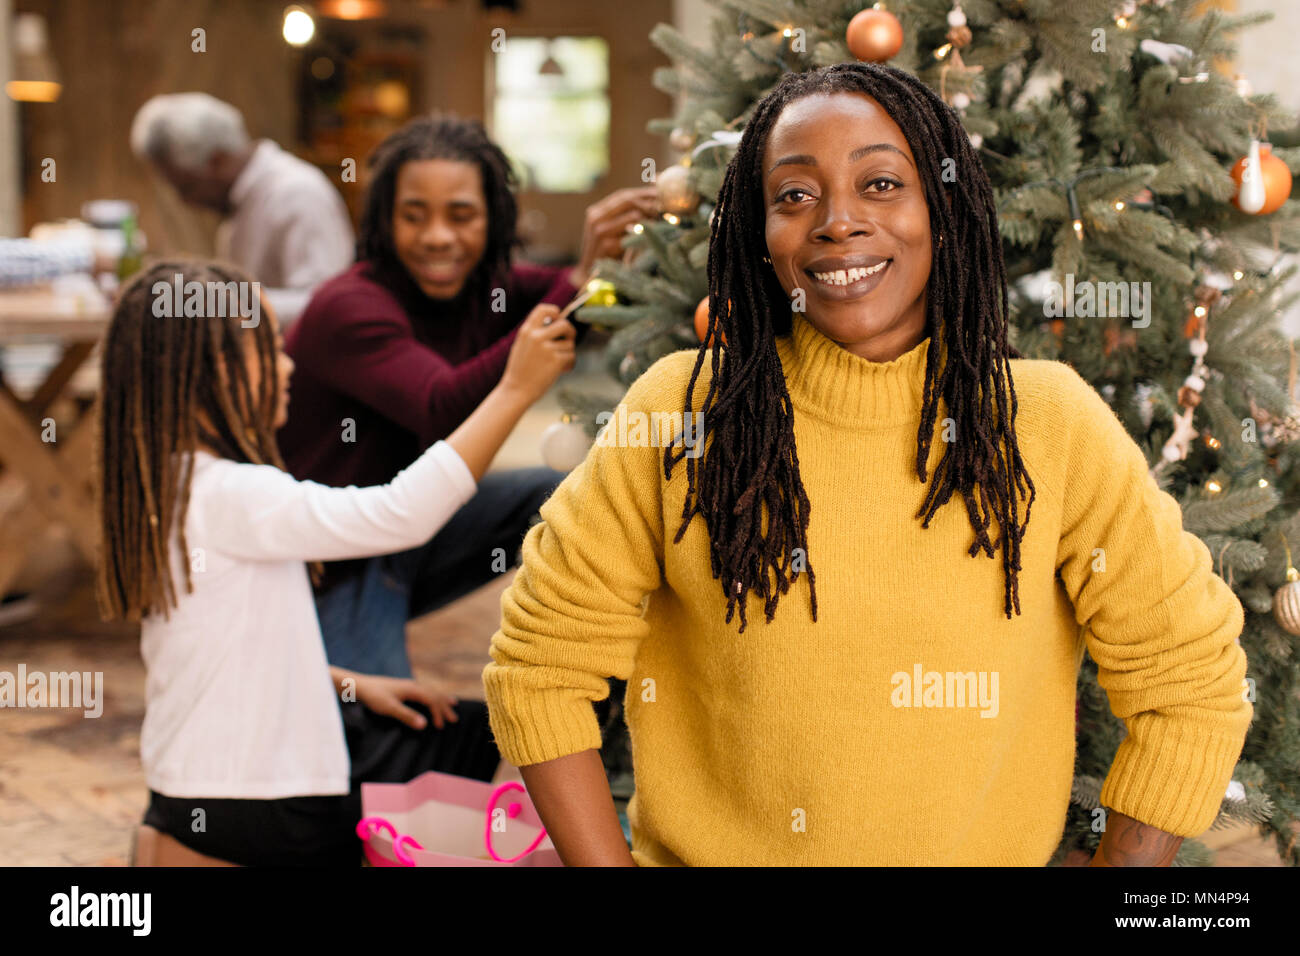 Portrait smiling woman decorating Christmas tree with family Stock Photo